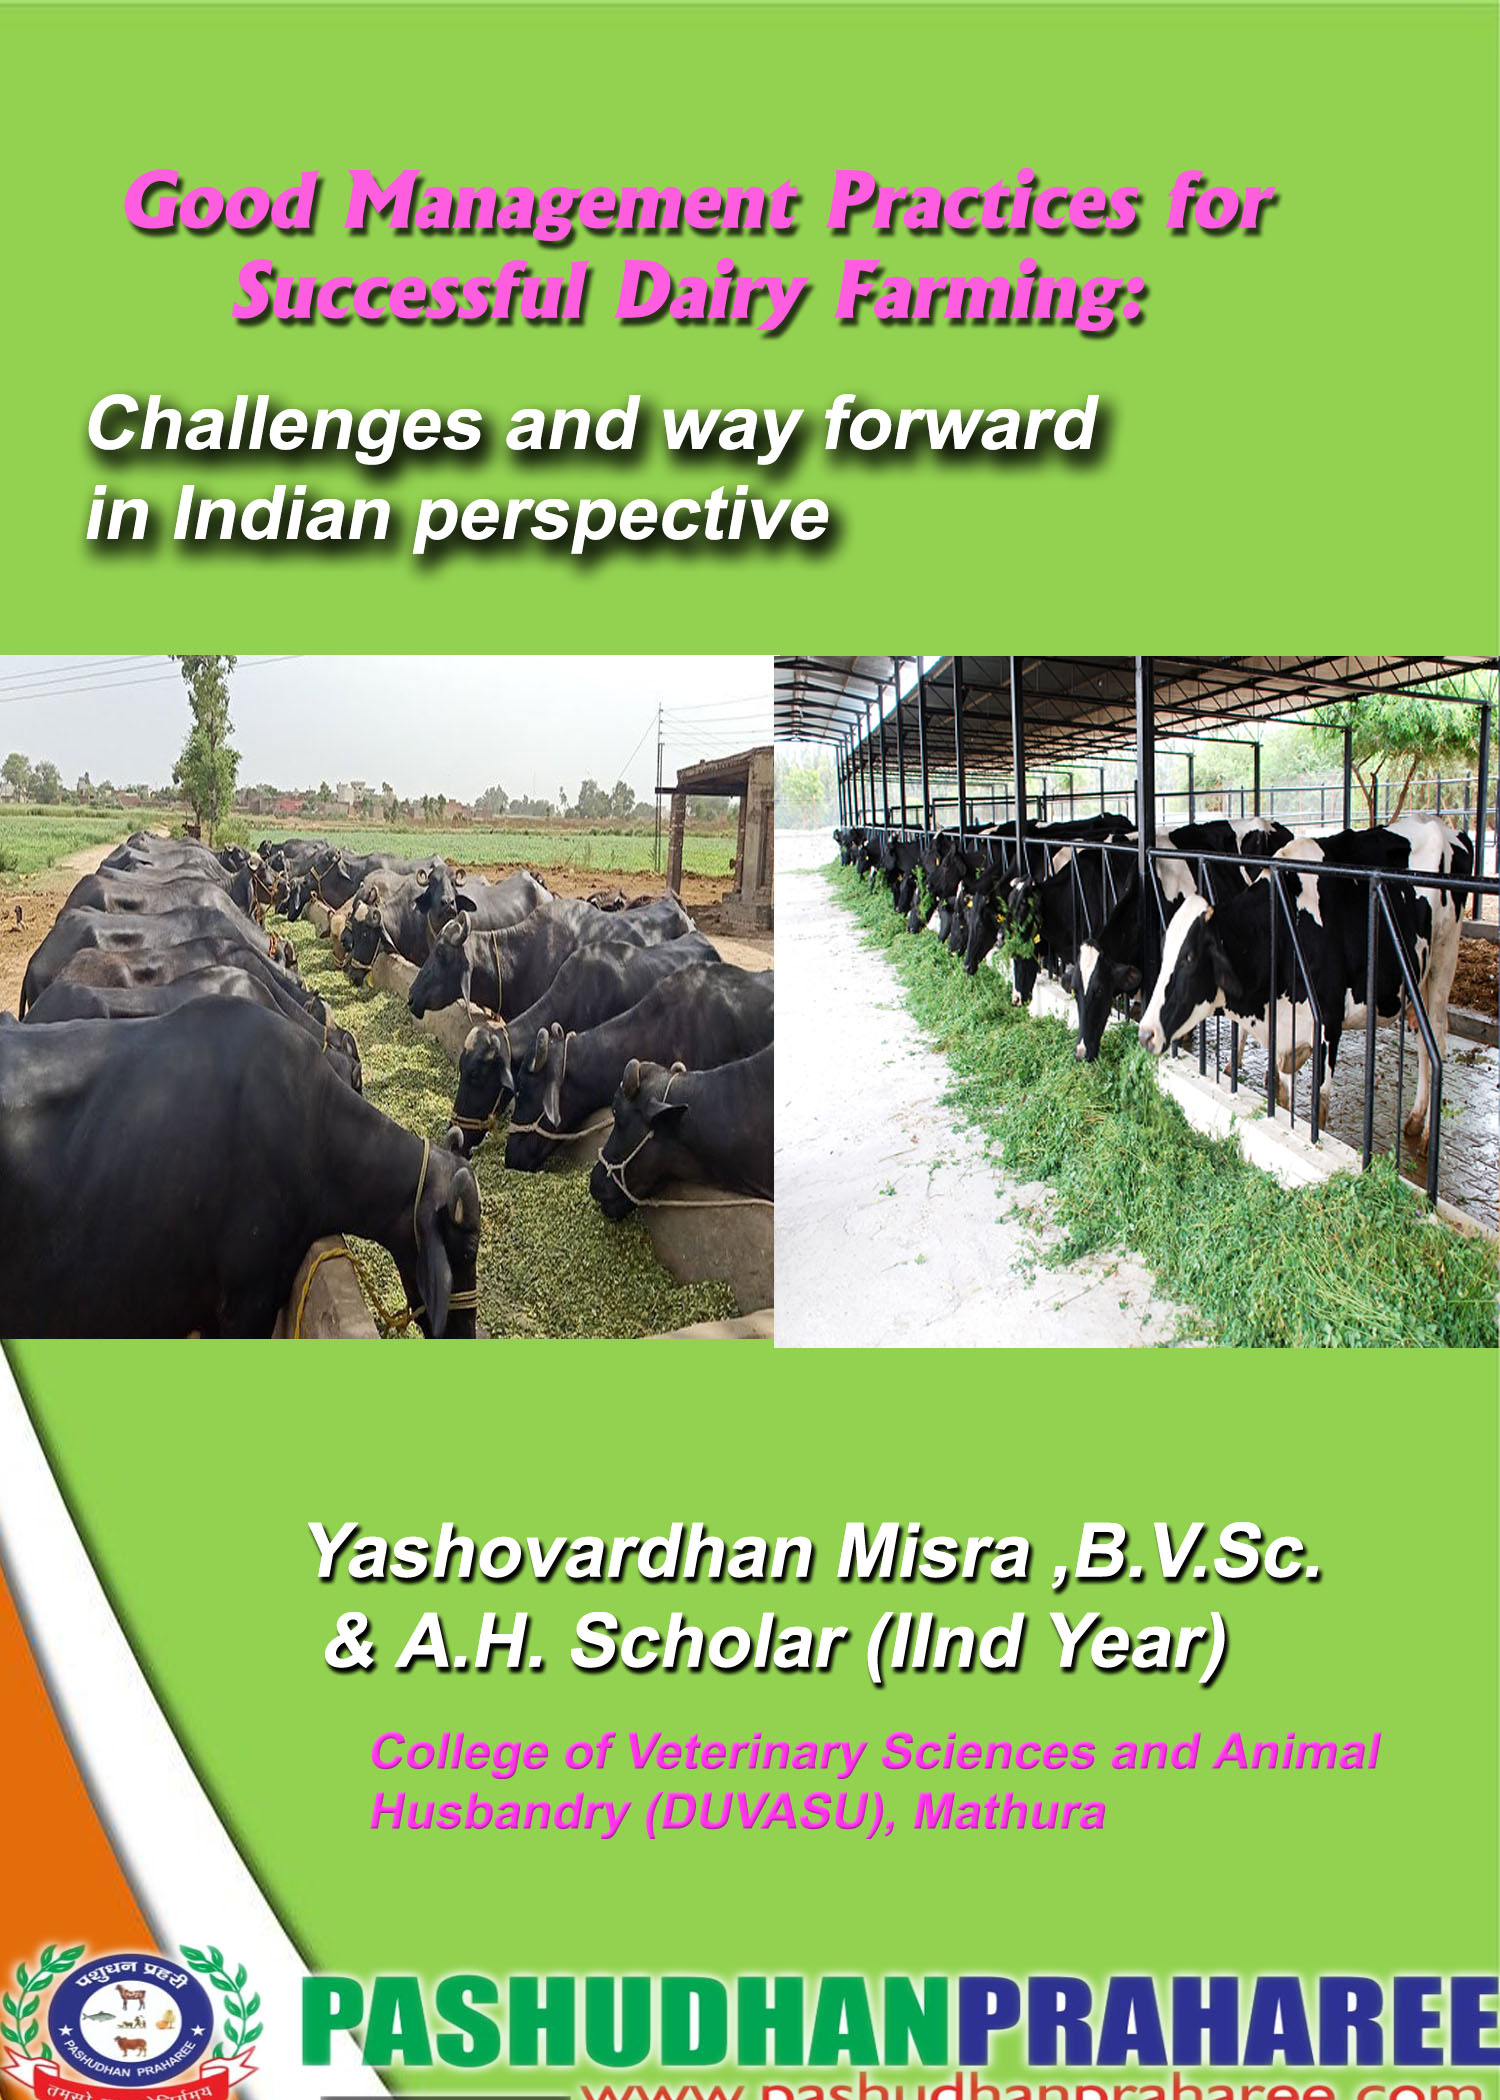 Successful Dairy Farming- Challenges and way forward